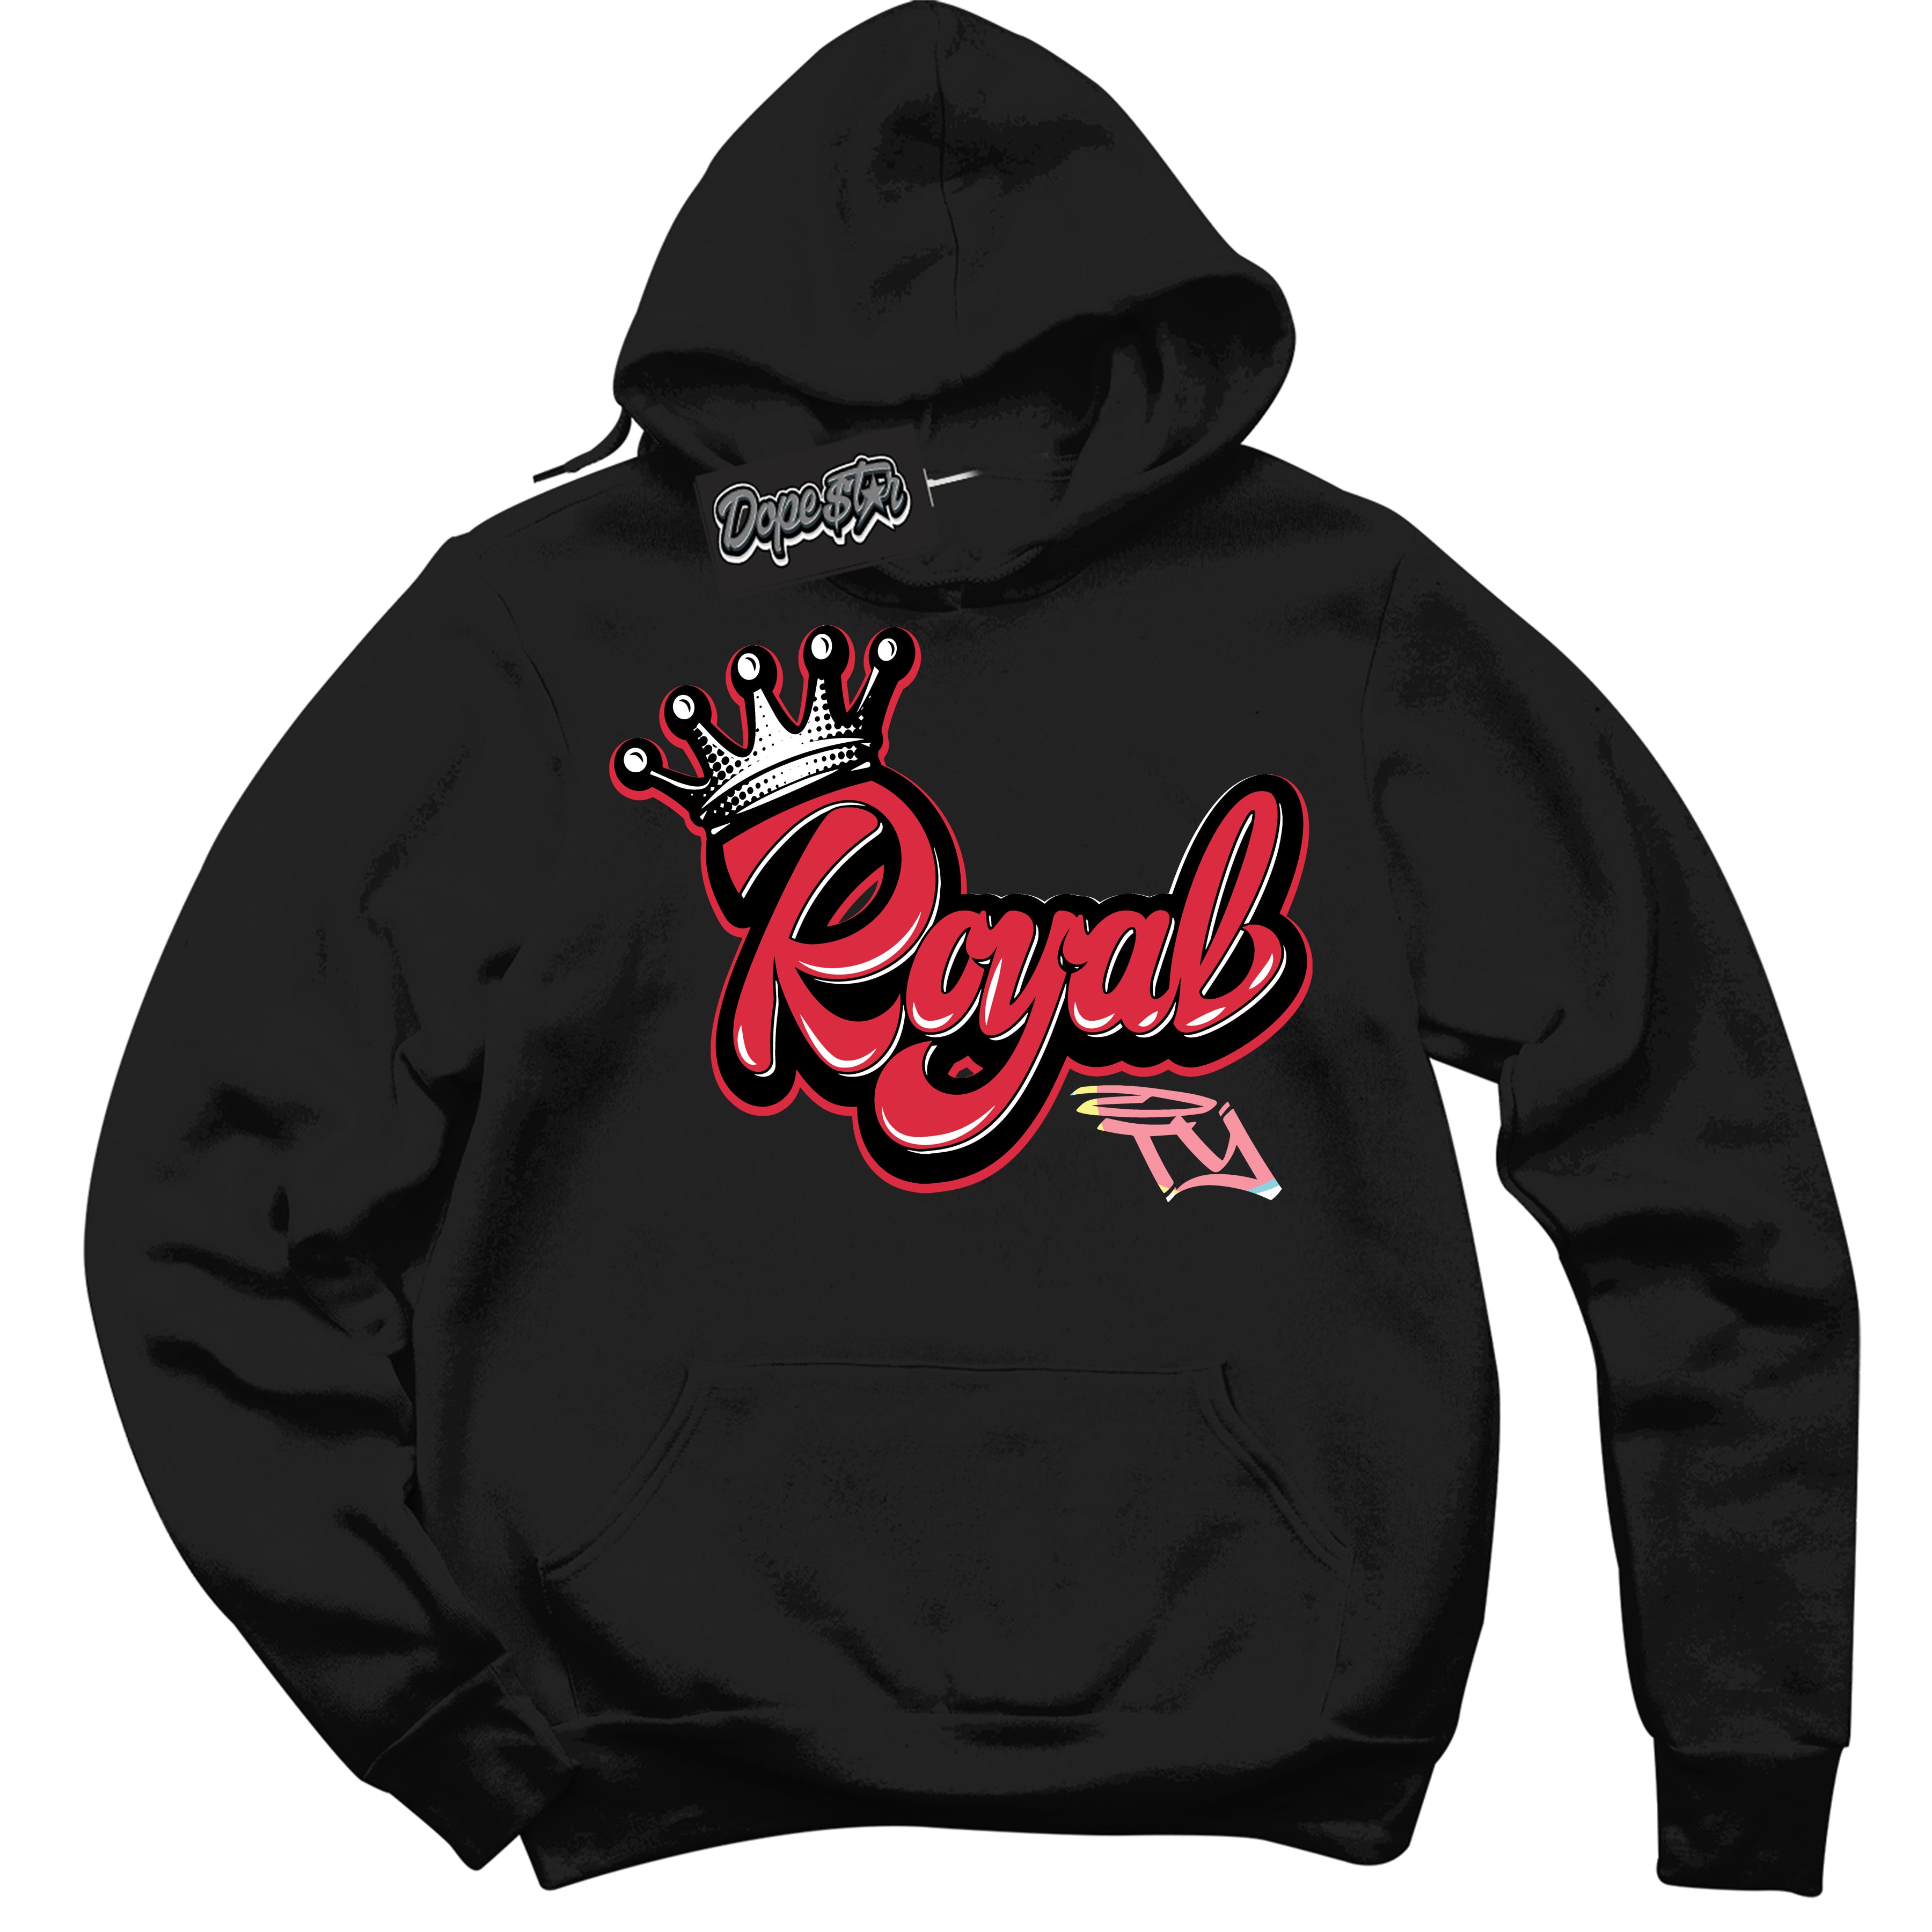 Cool Black Graphic DopeStar Hoodie with “ Royalty “ print, that perfectly matches Spider-Verse 1s sneakers